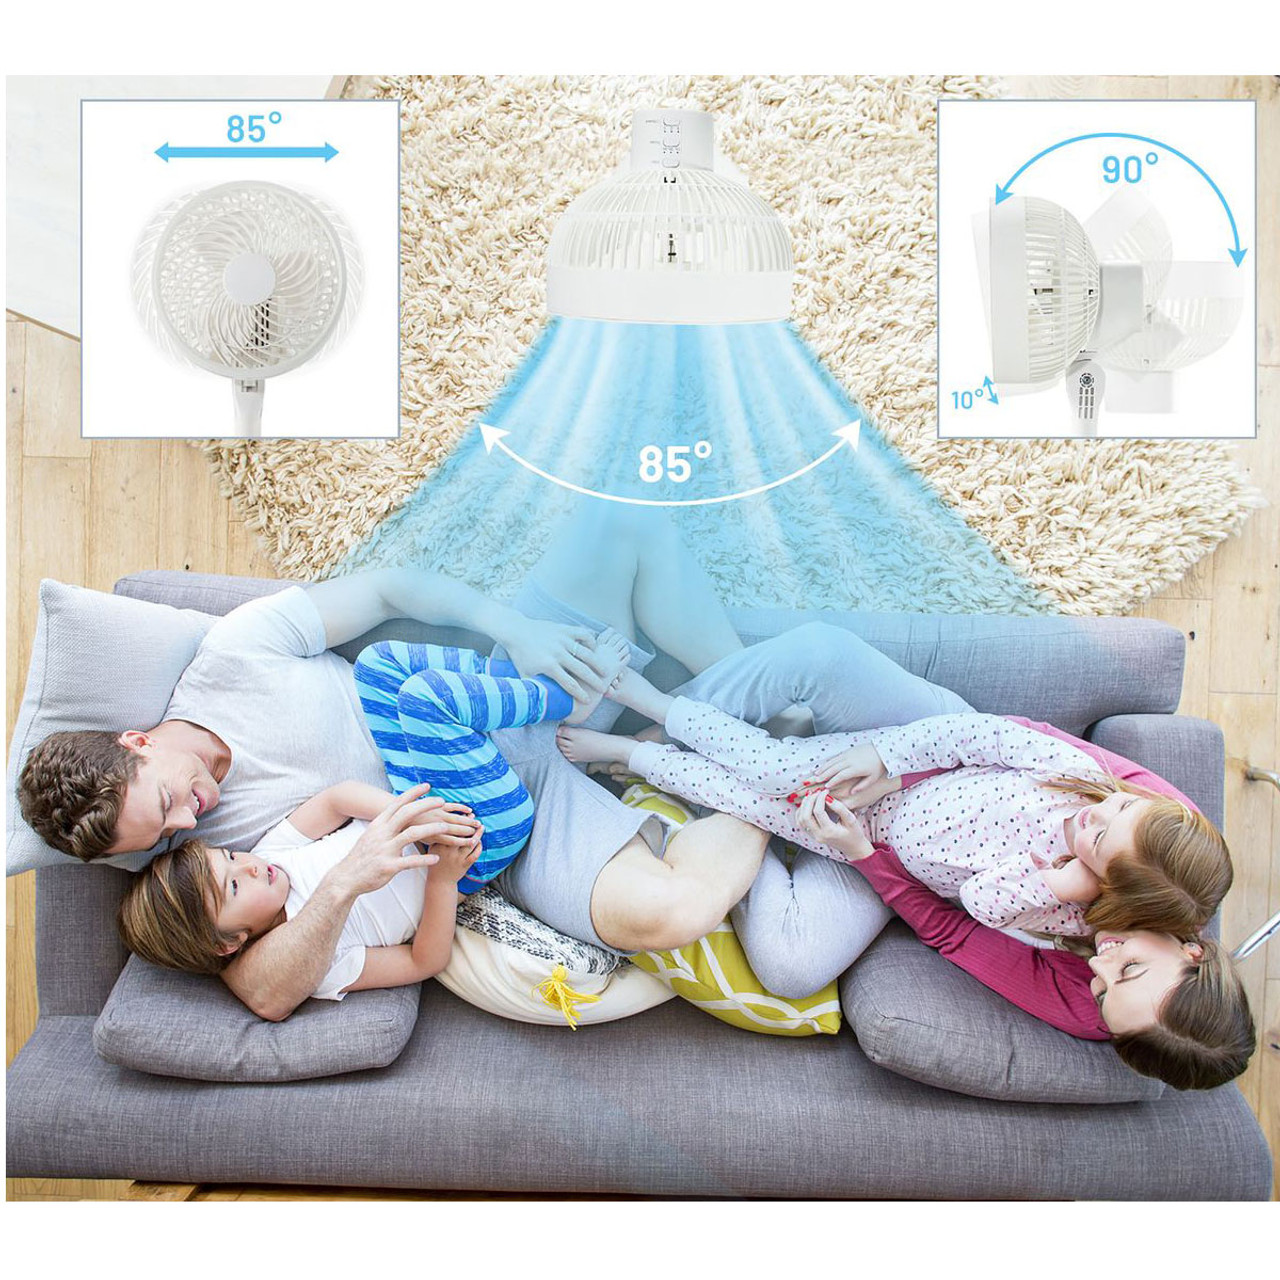 9-Inch Oscillating Pedestal Fan product image